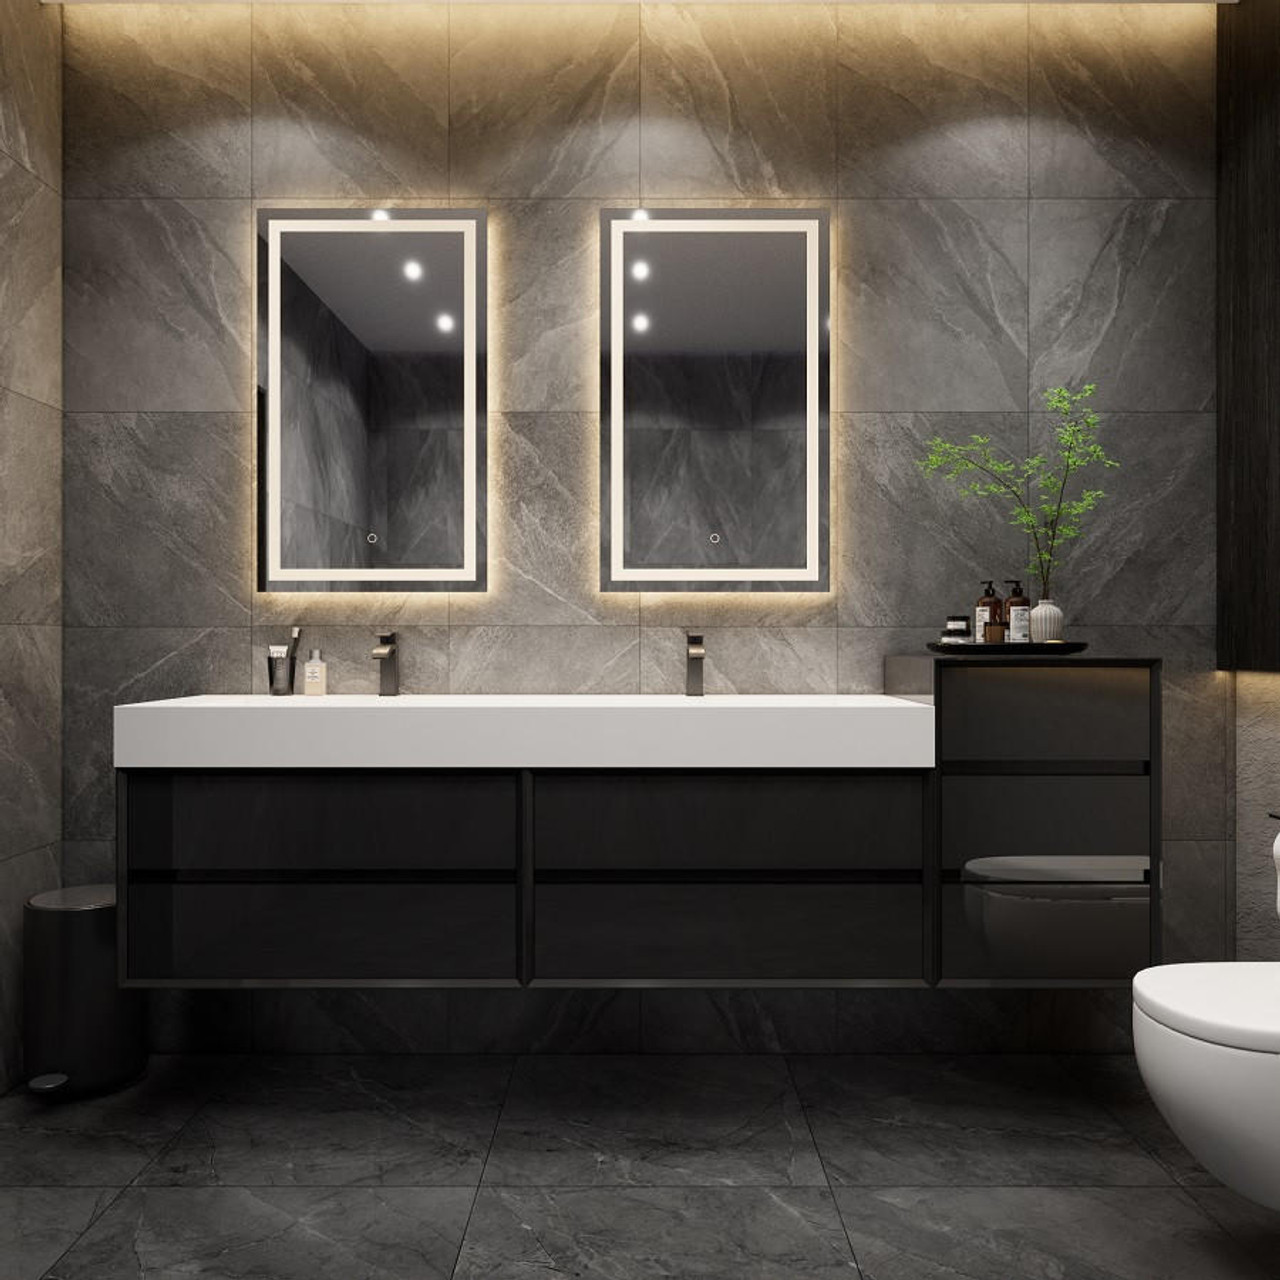 https://cdn11.bigcommerce.com/s-qgdlnuy6t7/images/stencil/1280x1280/products/1387/13408/max16-max-92-wall-mounted-bath-vanity-with-16-acrylic-sink-wsmall-side-cabinet__96189.1679352713.jpg?c=2